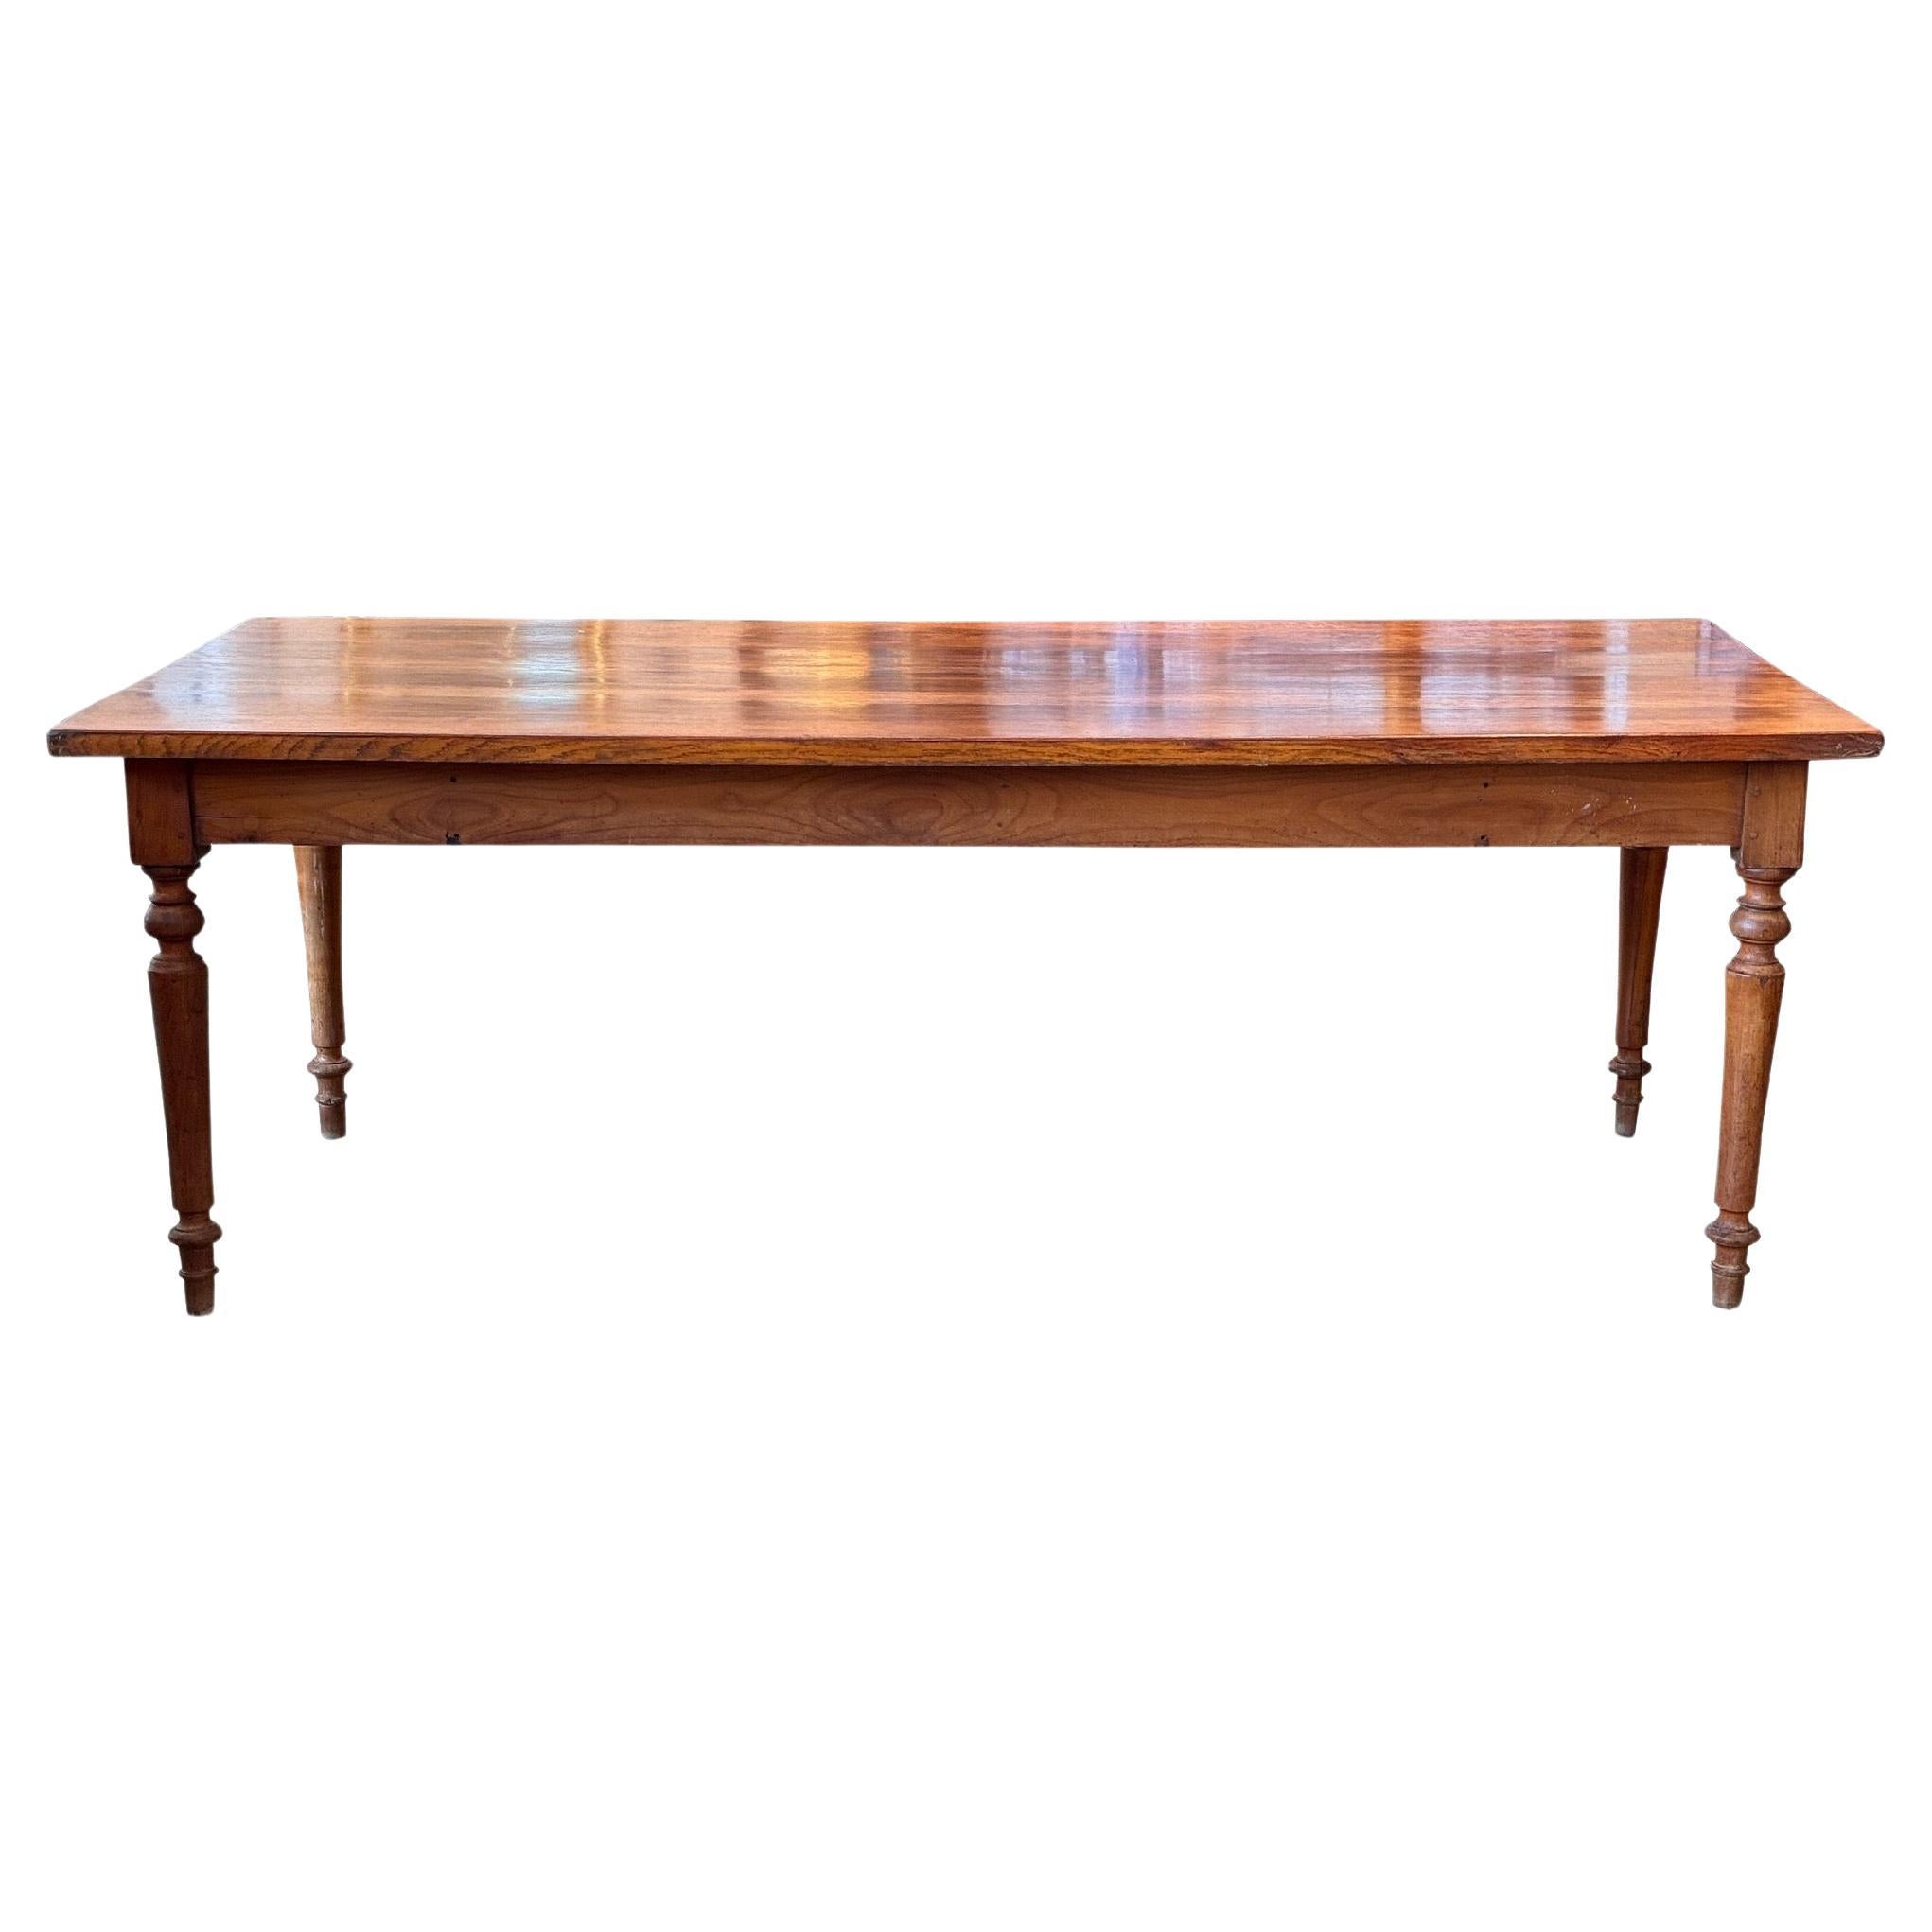 Late 19th Century French Farm Table